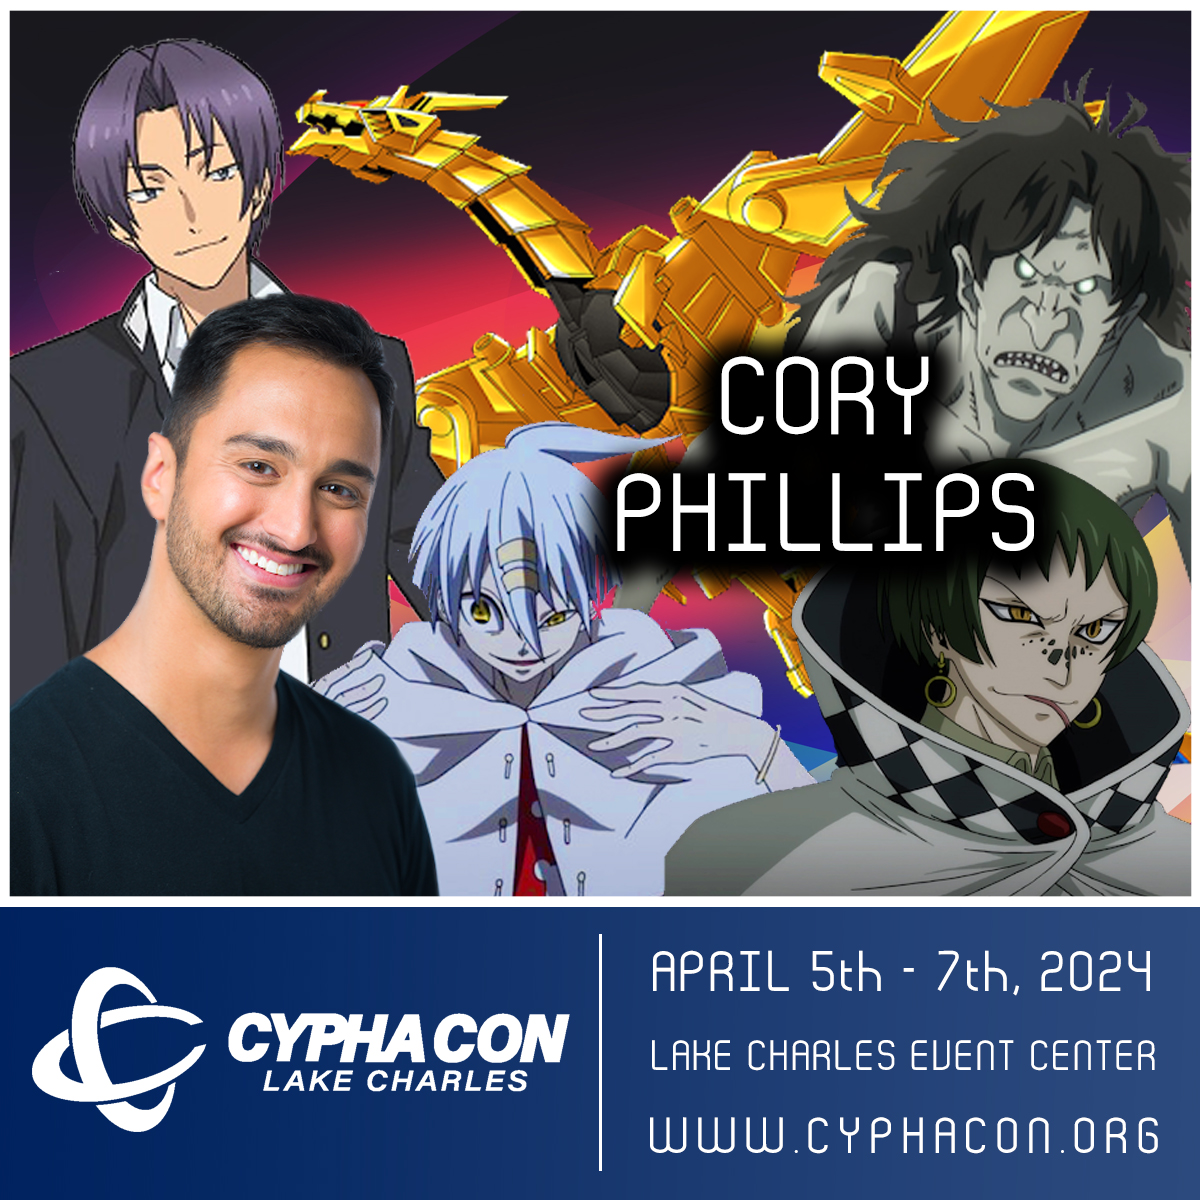 CYPHACON is proud to announce our first Special Guest, @CoryJPhillips Cory will be joining us April 5th - 7th, 2024 at the @LCCivicCenter in Lake Charles Louisiana! For complete information visit our website tickets on sale now! cyphacon.org/speakers/coryj…